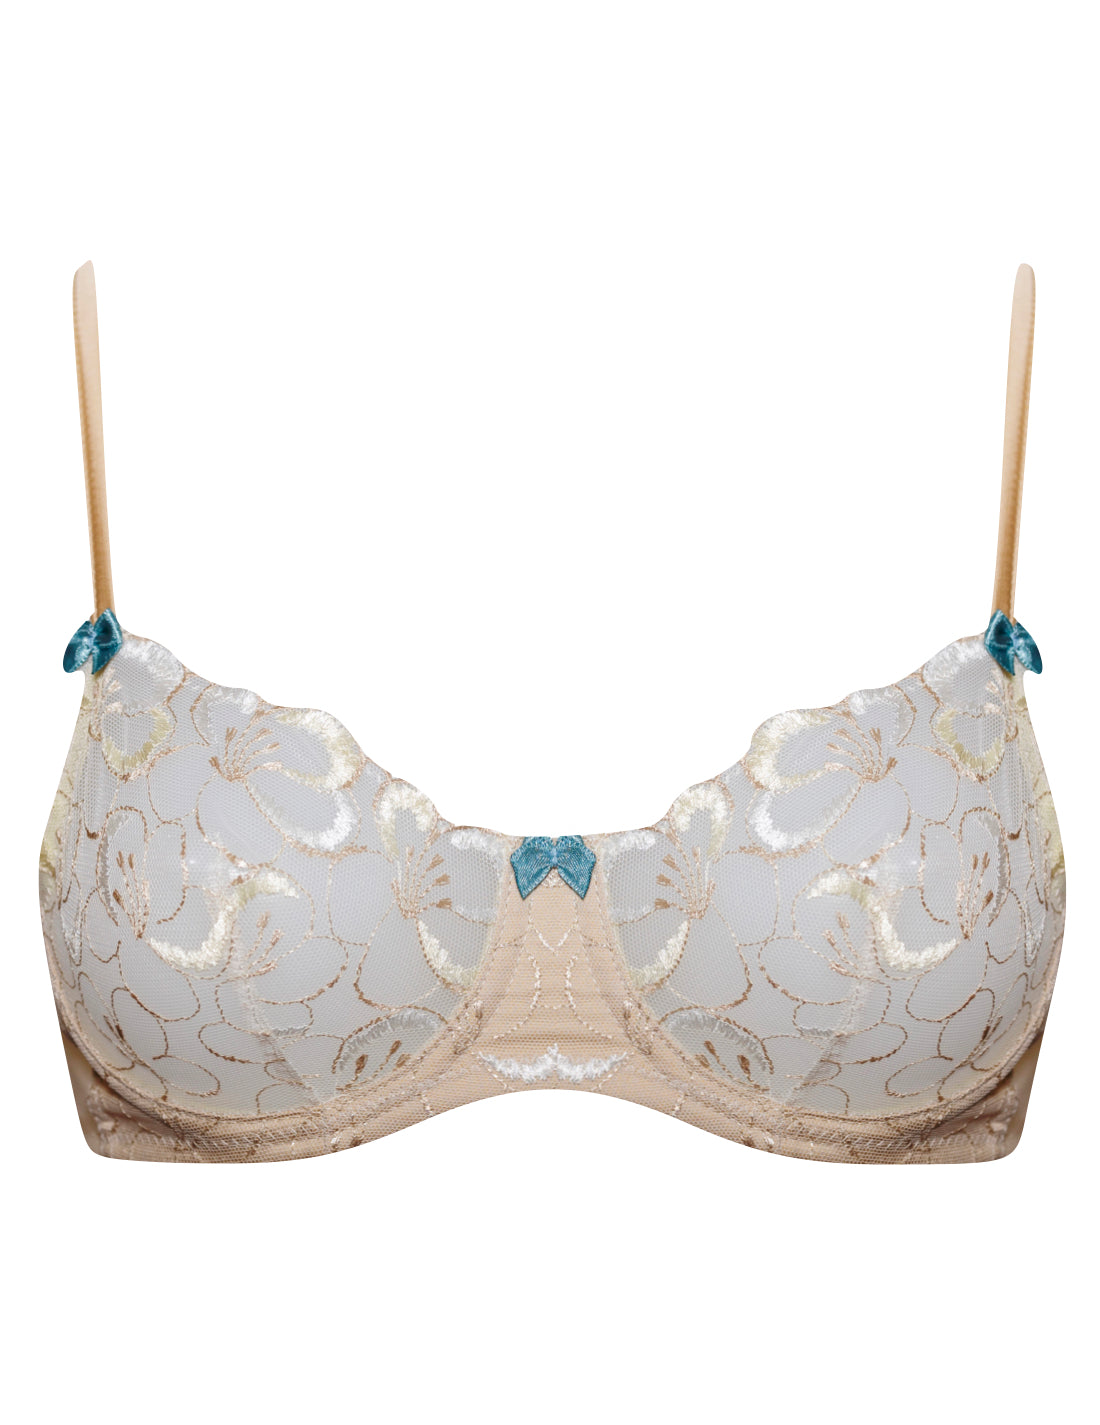 NEW Mimi Holliday 36B Bra Fully Padded Super Plunge Lace Lingerie Damaris  Blue Size undefined - $75 New With Tags - From Jessica